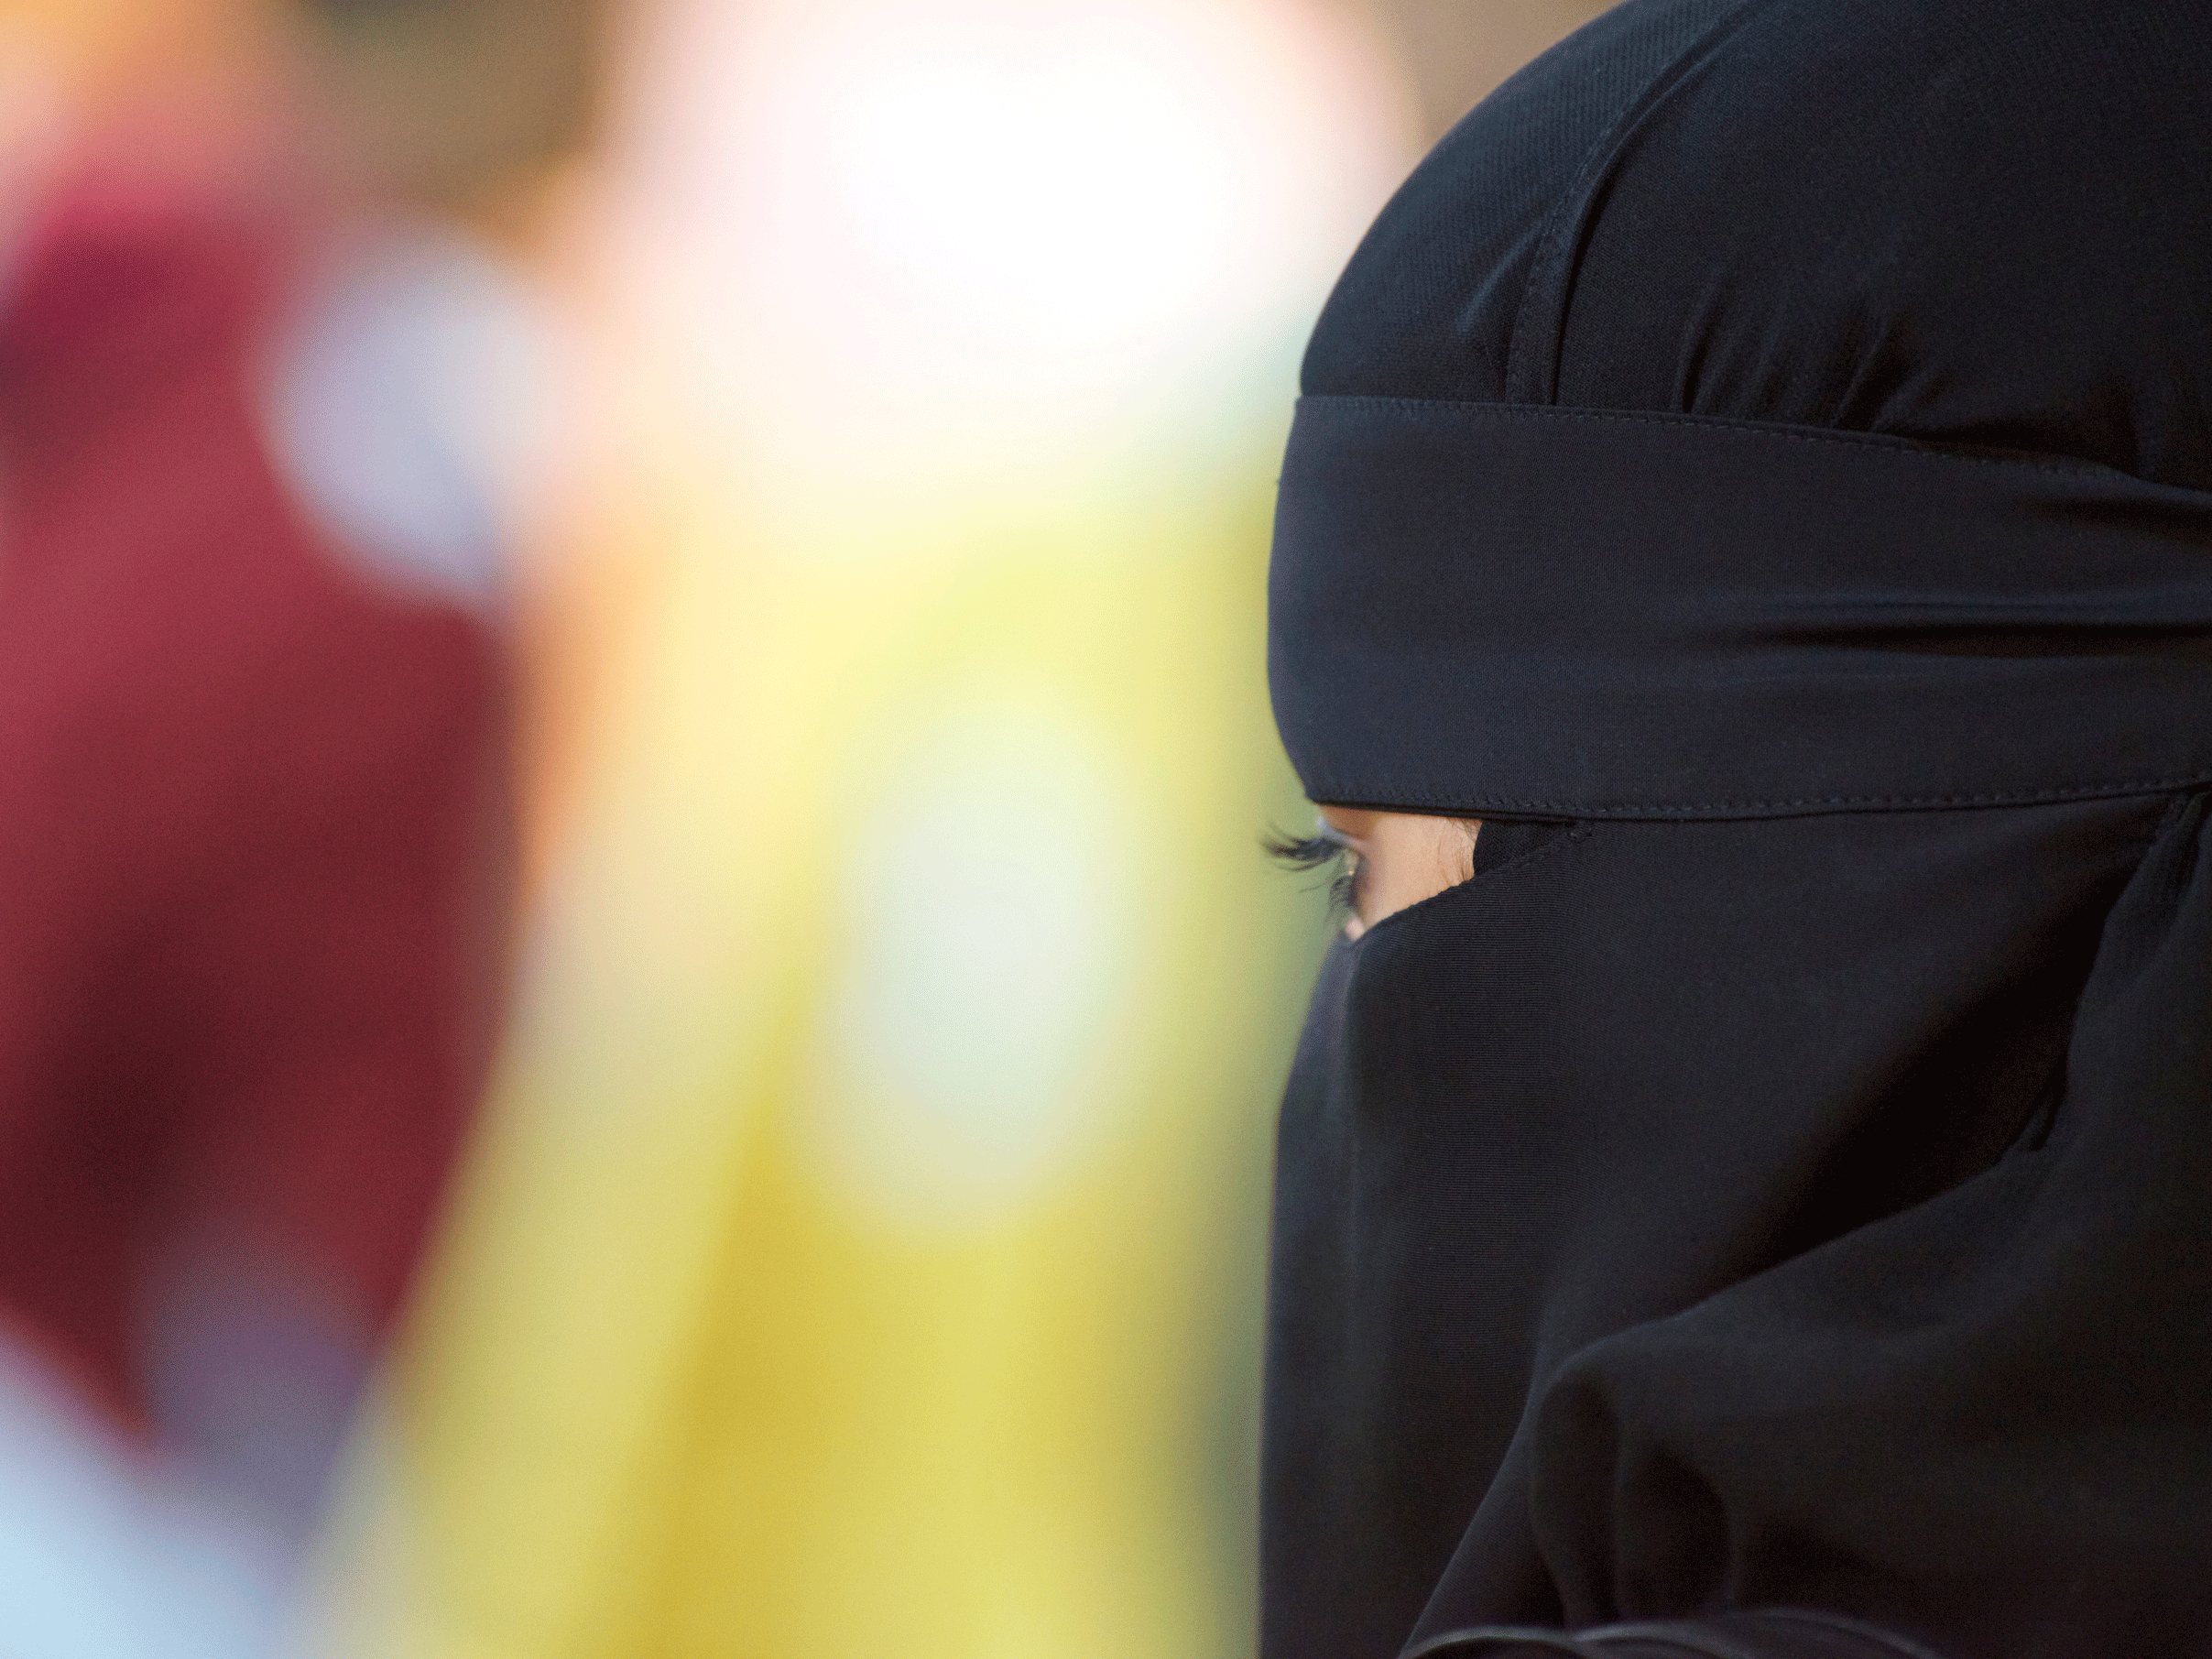 Quebec Bans Muslim Women From Wearing Face Veils On Public Transport The Independent The